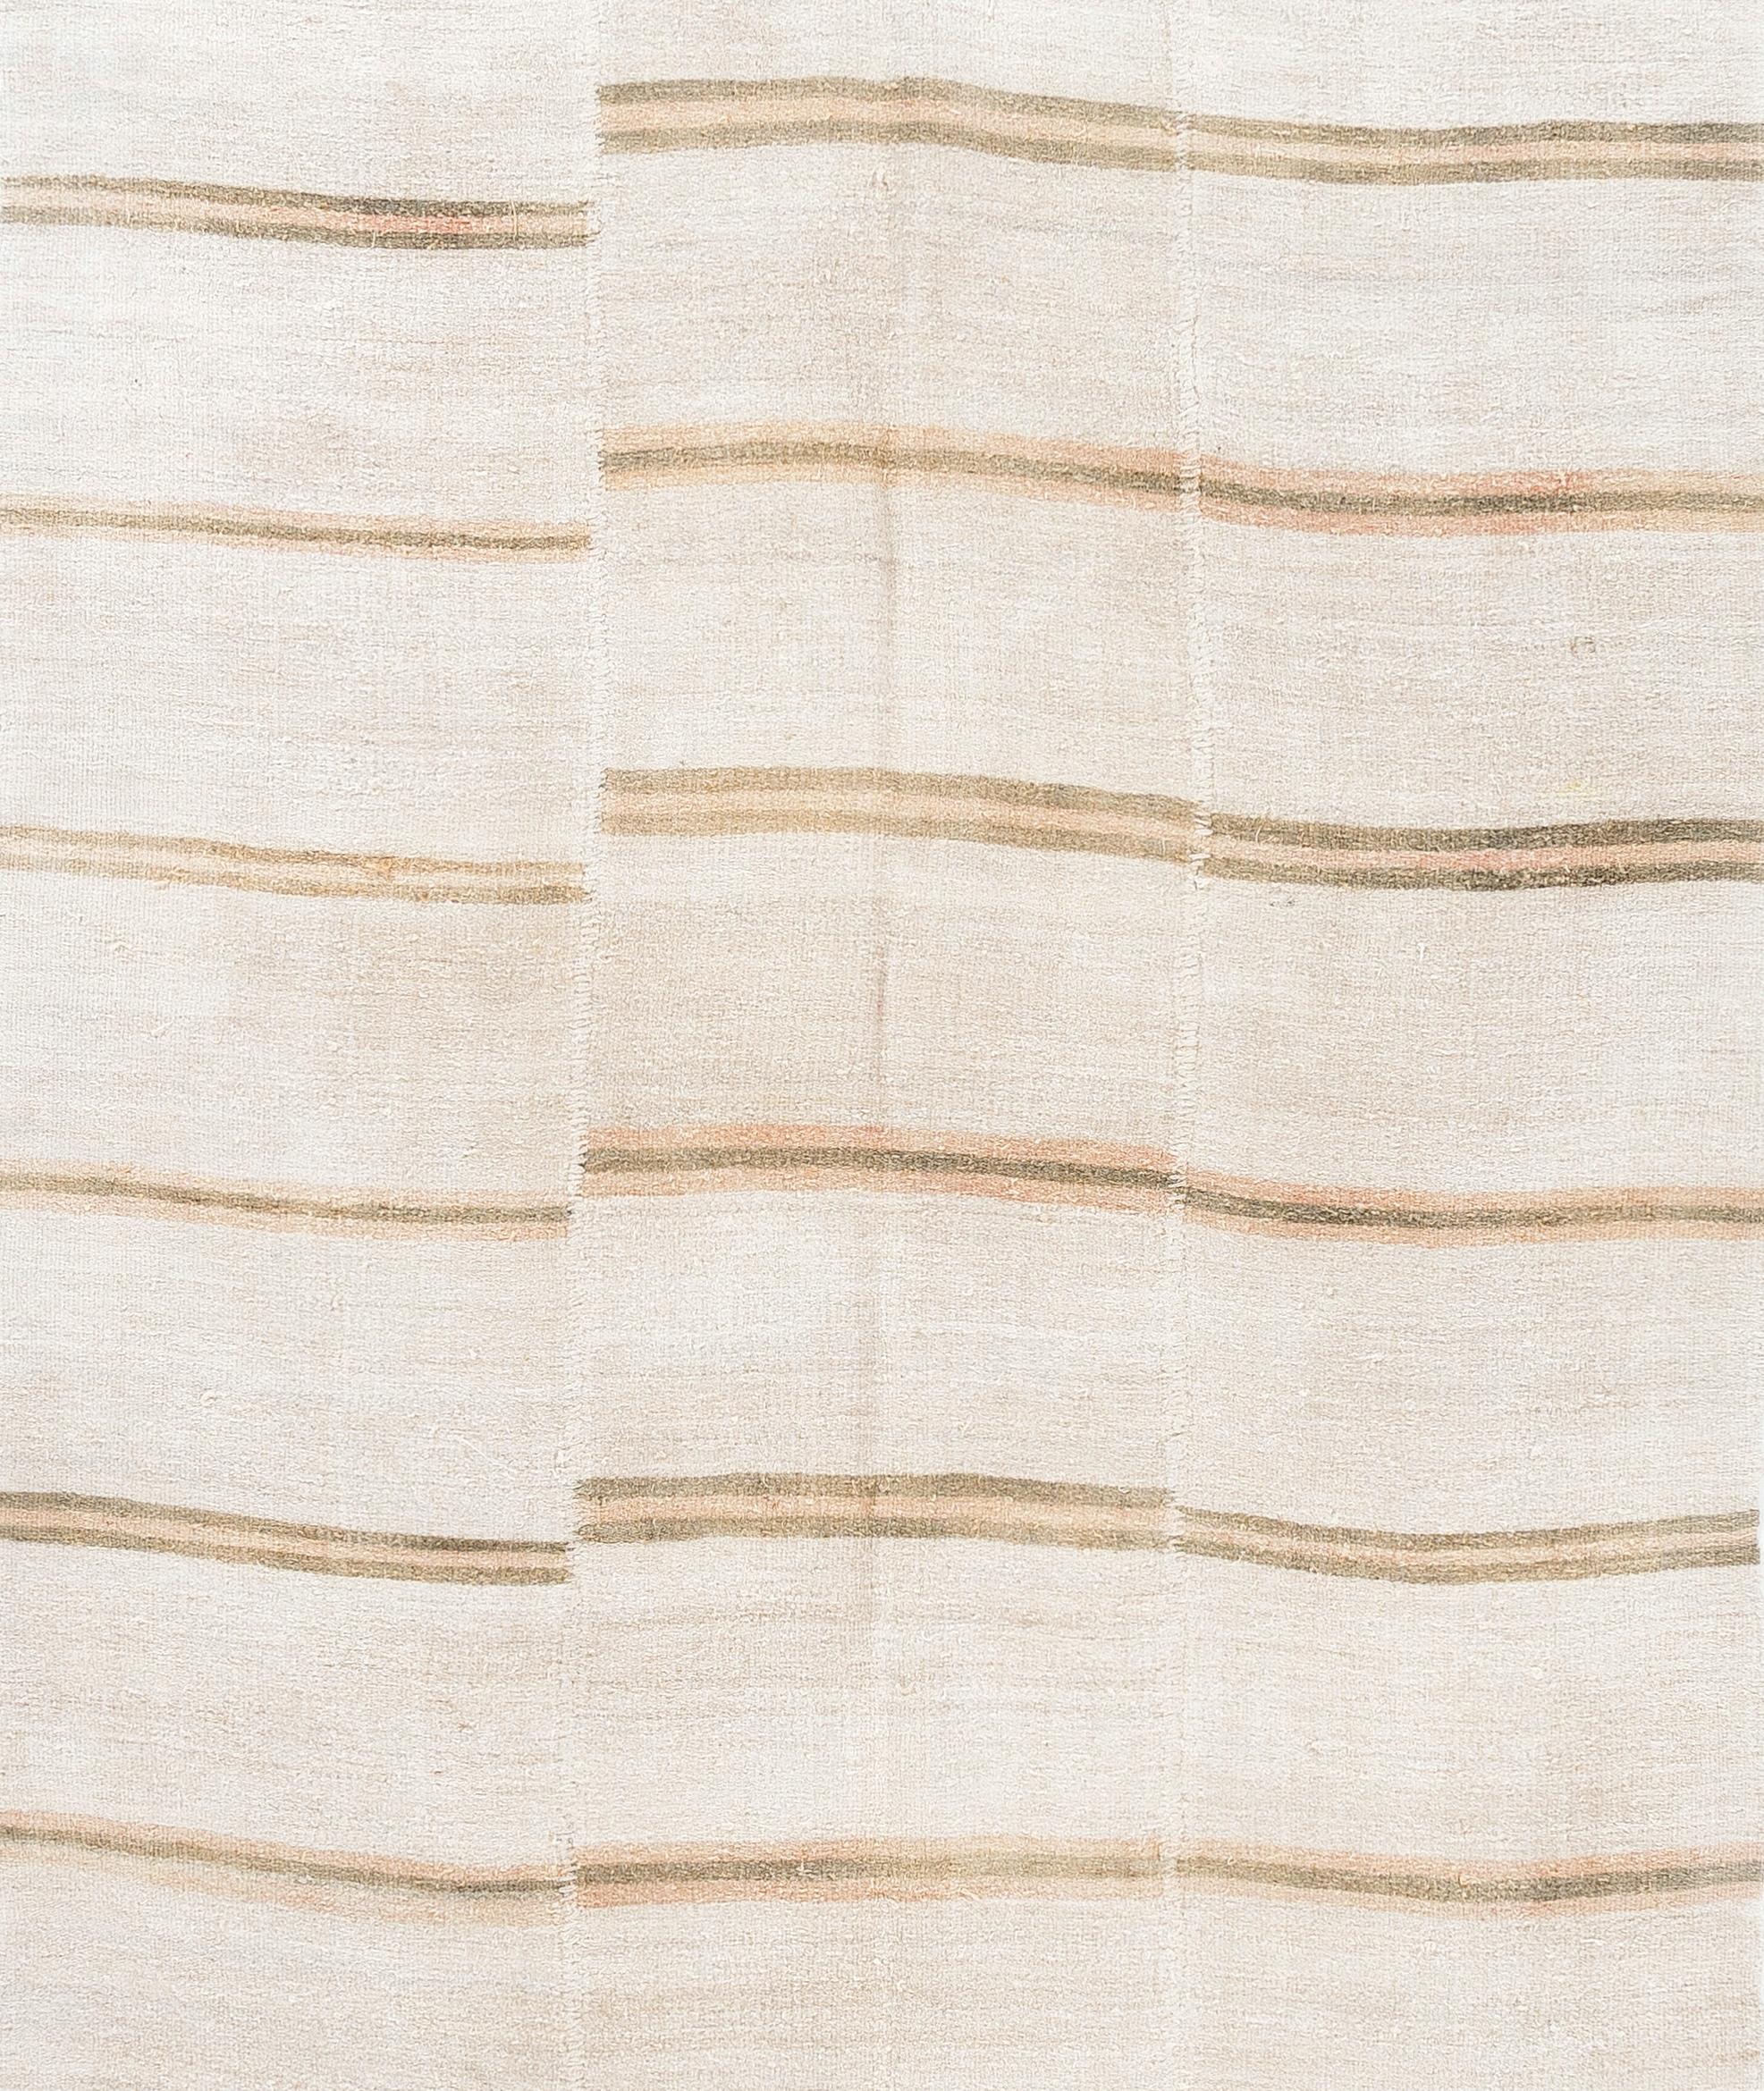 Hand-Woven 5.8x12.4 Ft Vintage Handwoven Striped Kilim Made of Hemp Flatweave Rug in Ivory For Sale